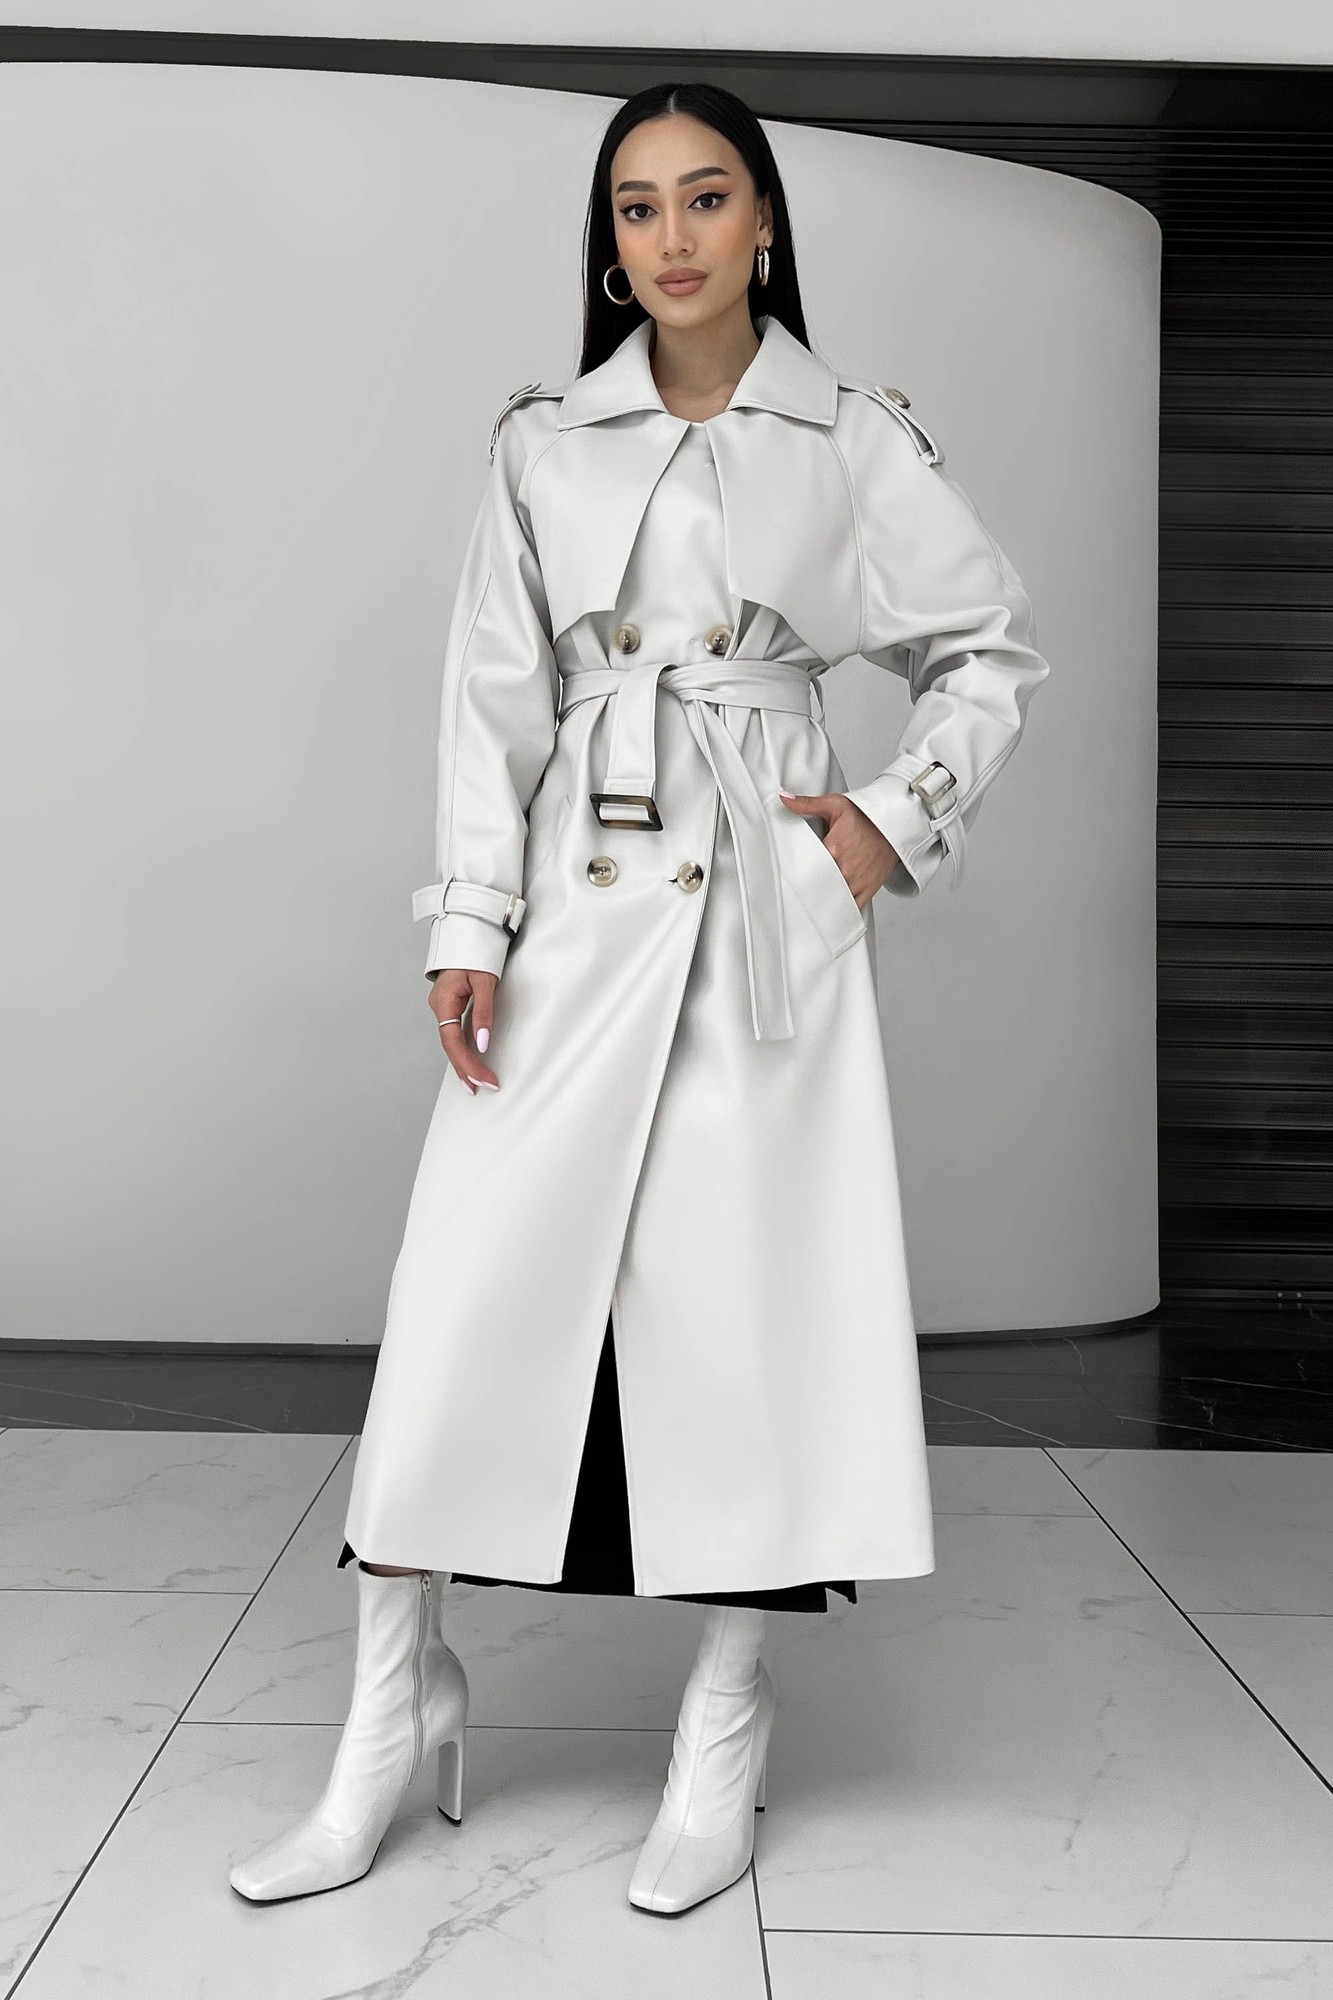 The Next trench coat is elongated in white